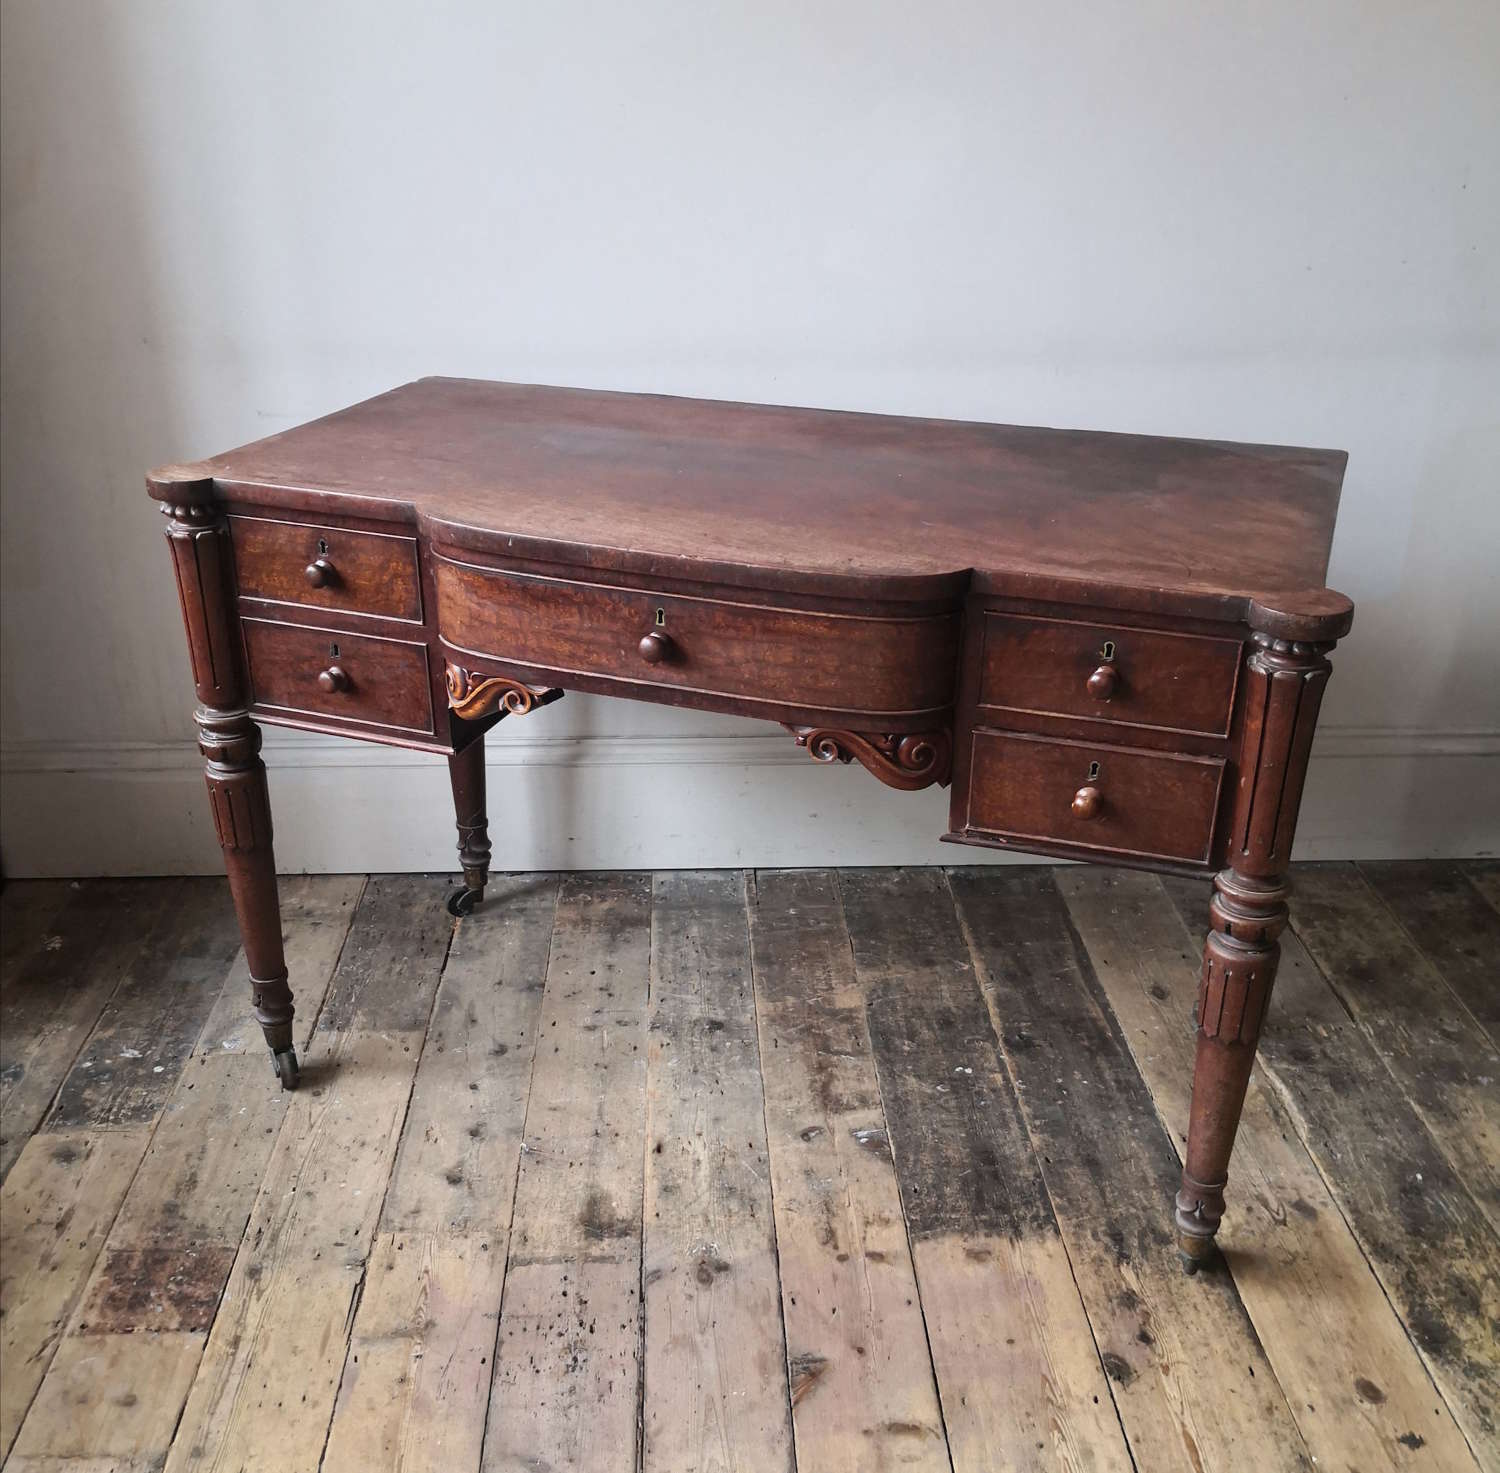 19th century writing/dressing table